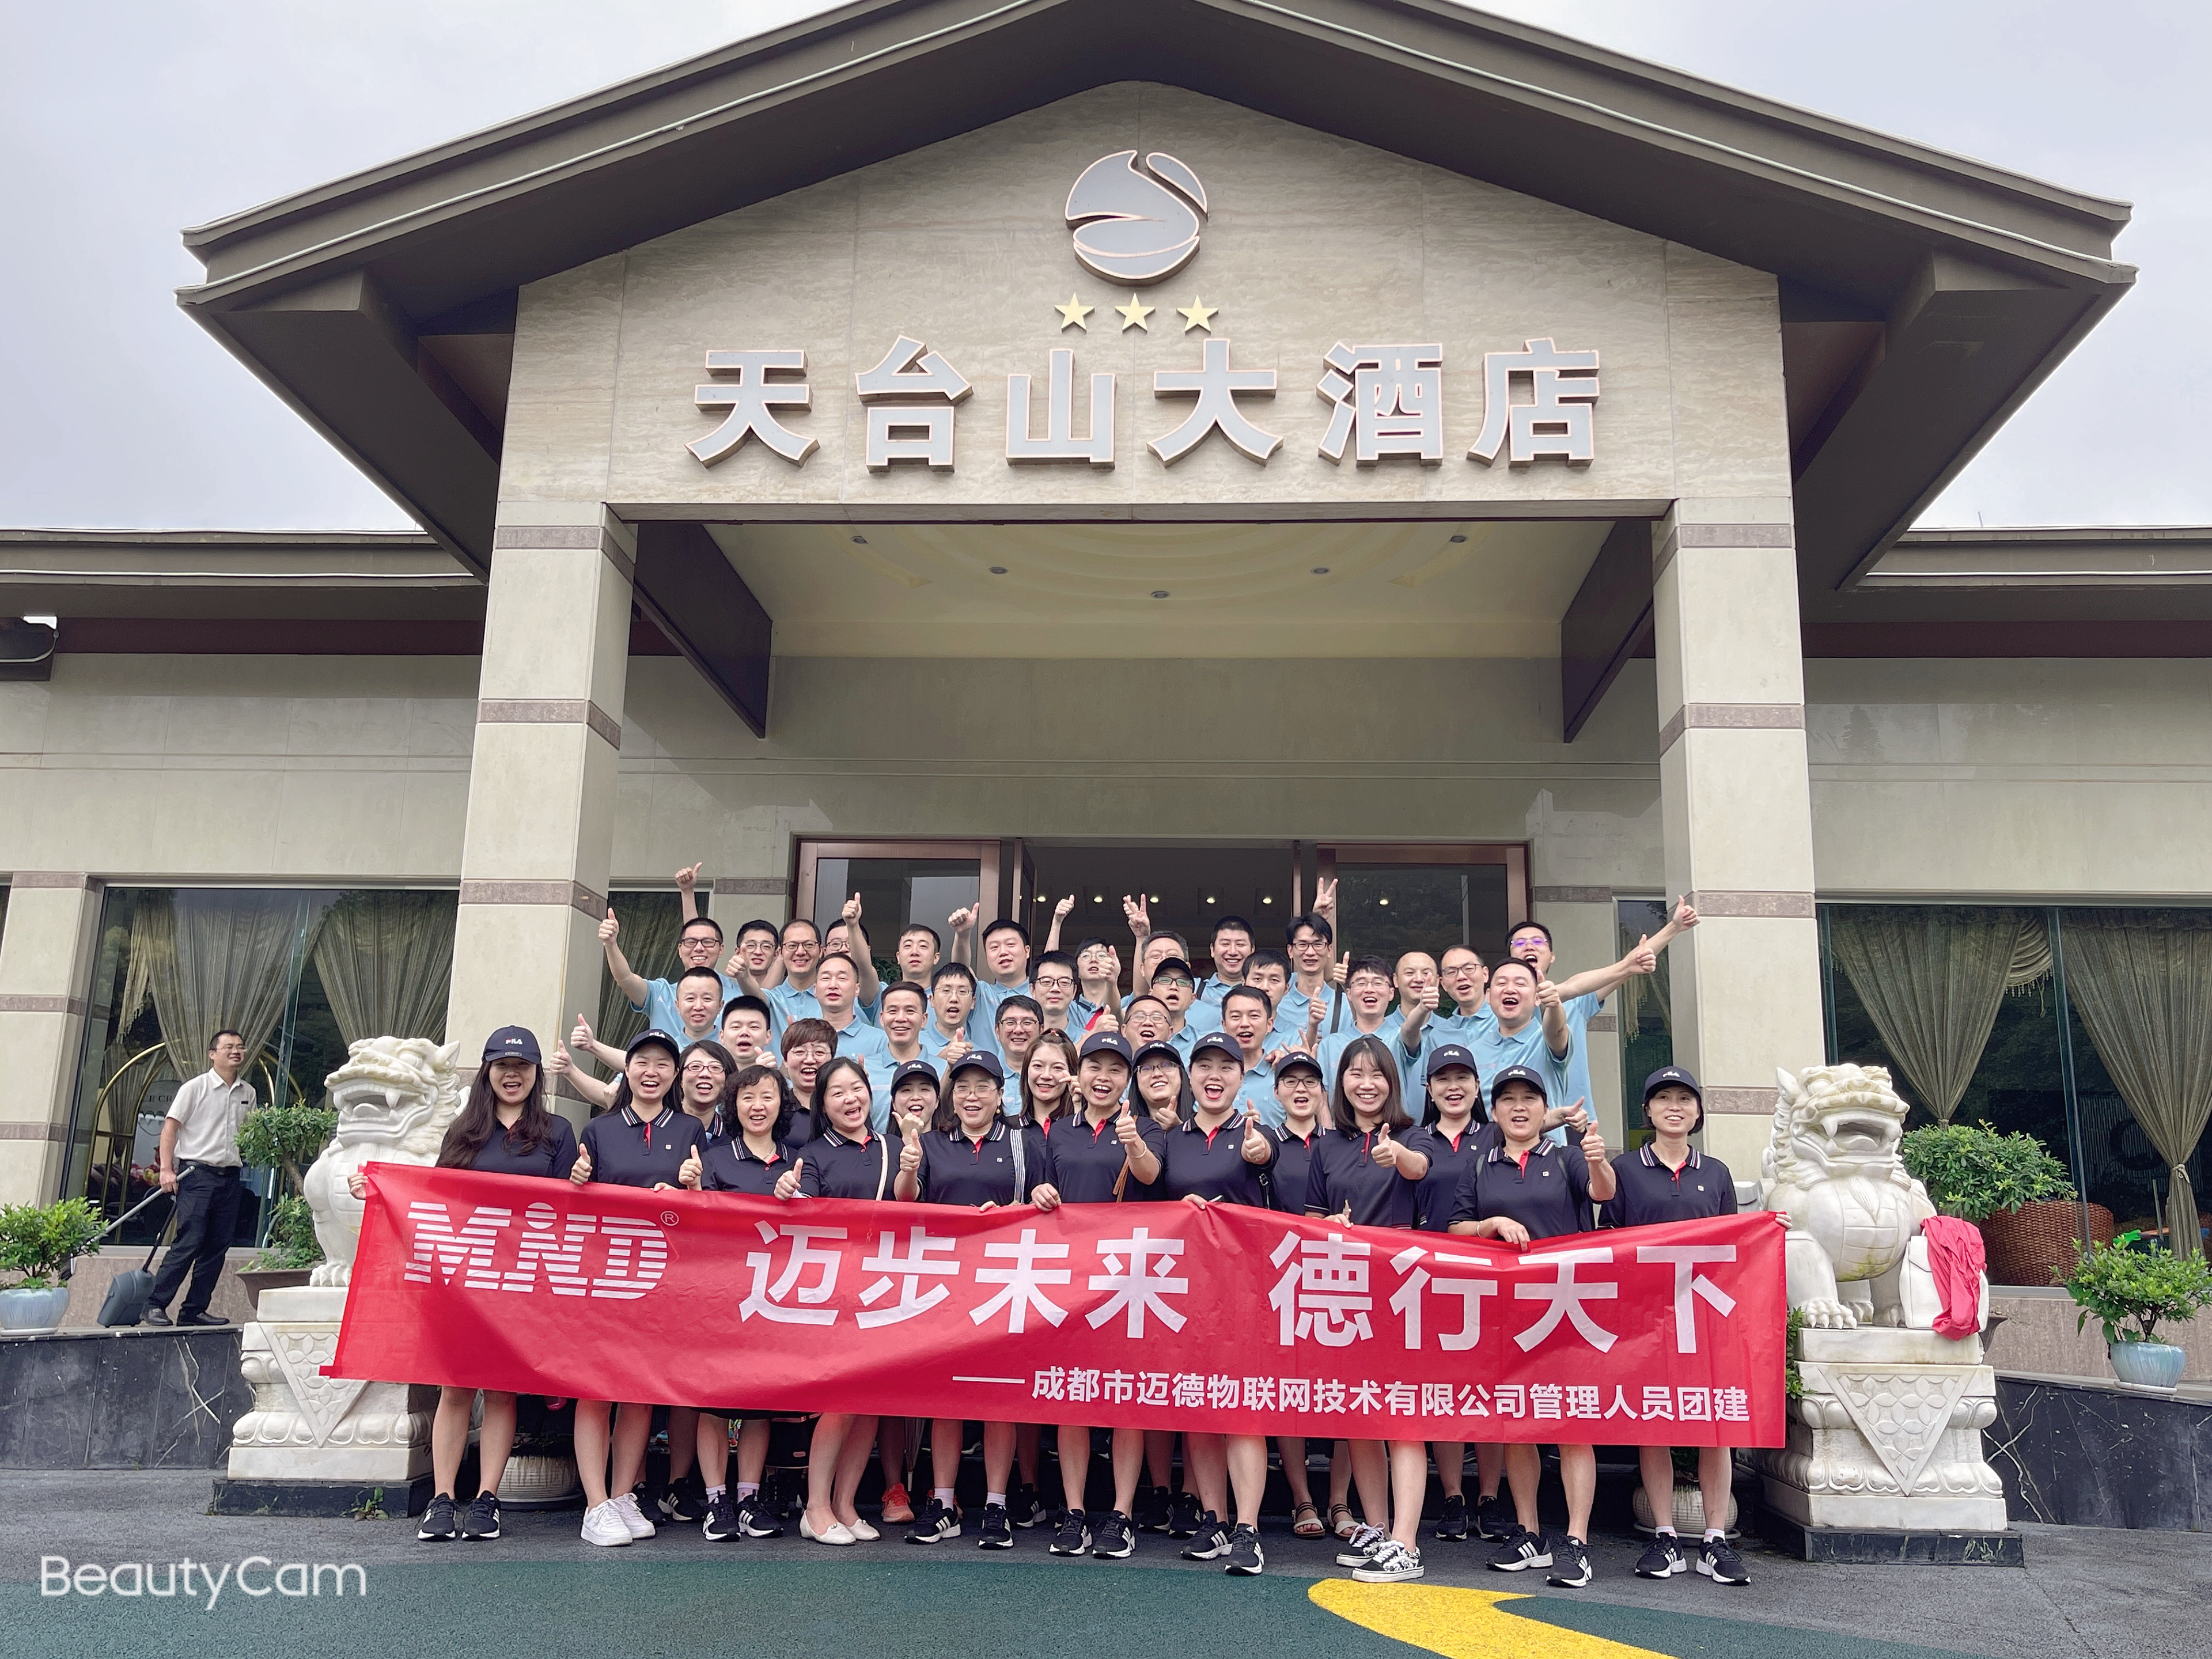 Wonderful and wonderful Congratulations to Chengdu Maide for the successful conclusion of the 2021 half-year conference and team building activities!